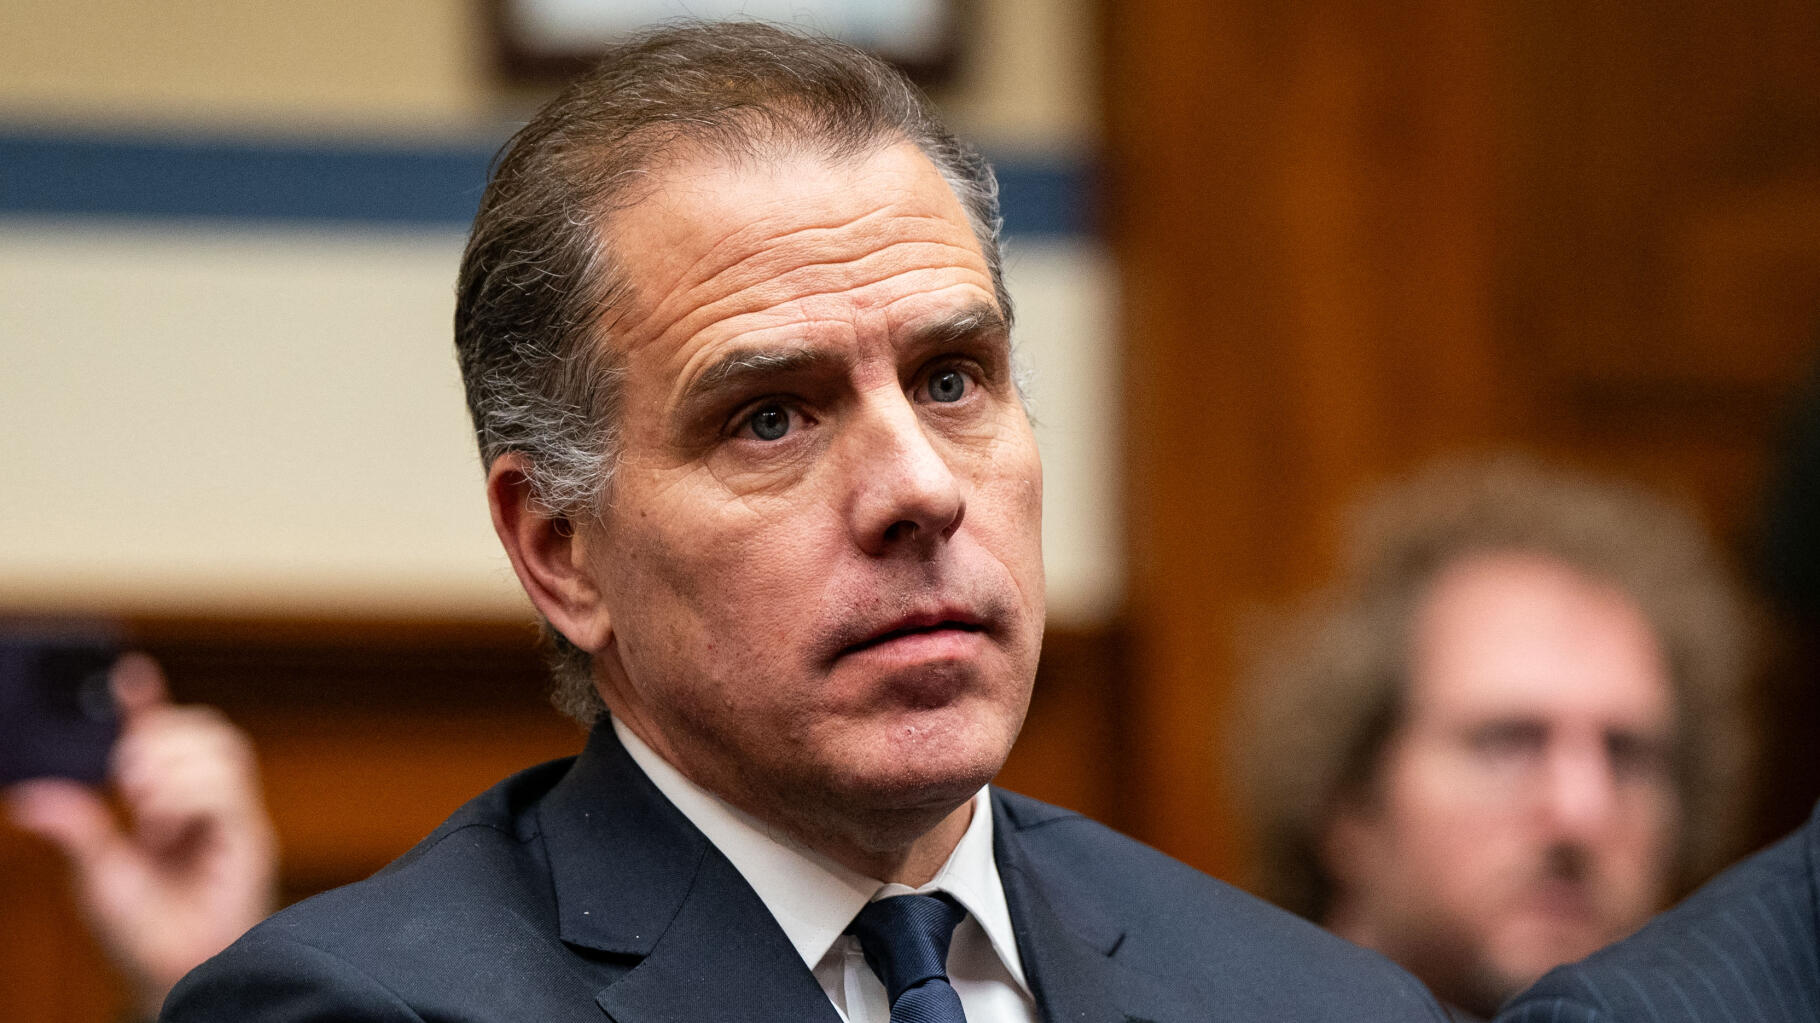 Hunter Biden makes a surprise appearance in Congress, angering elected officials